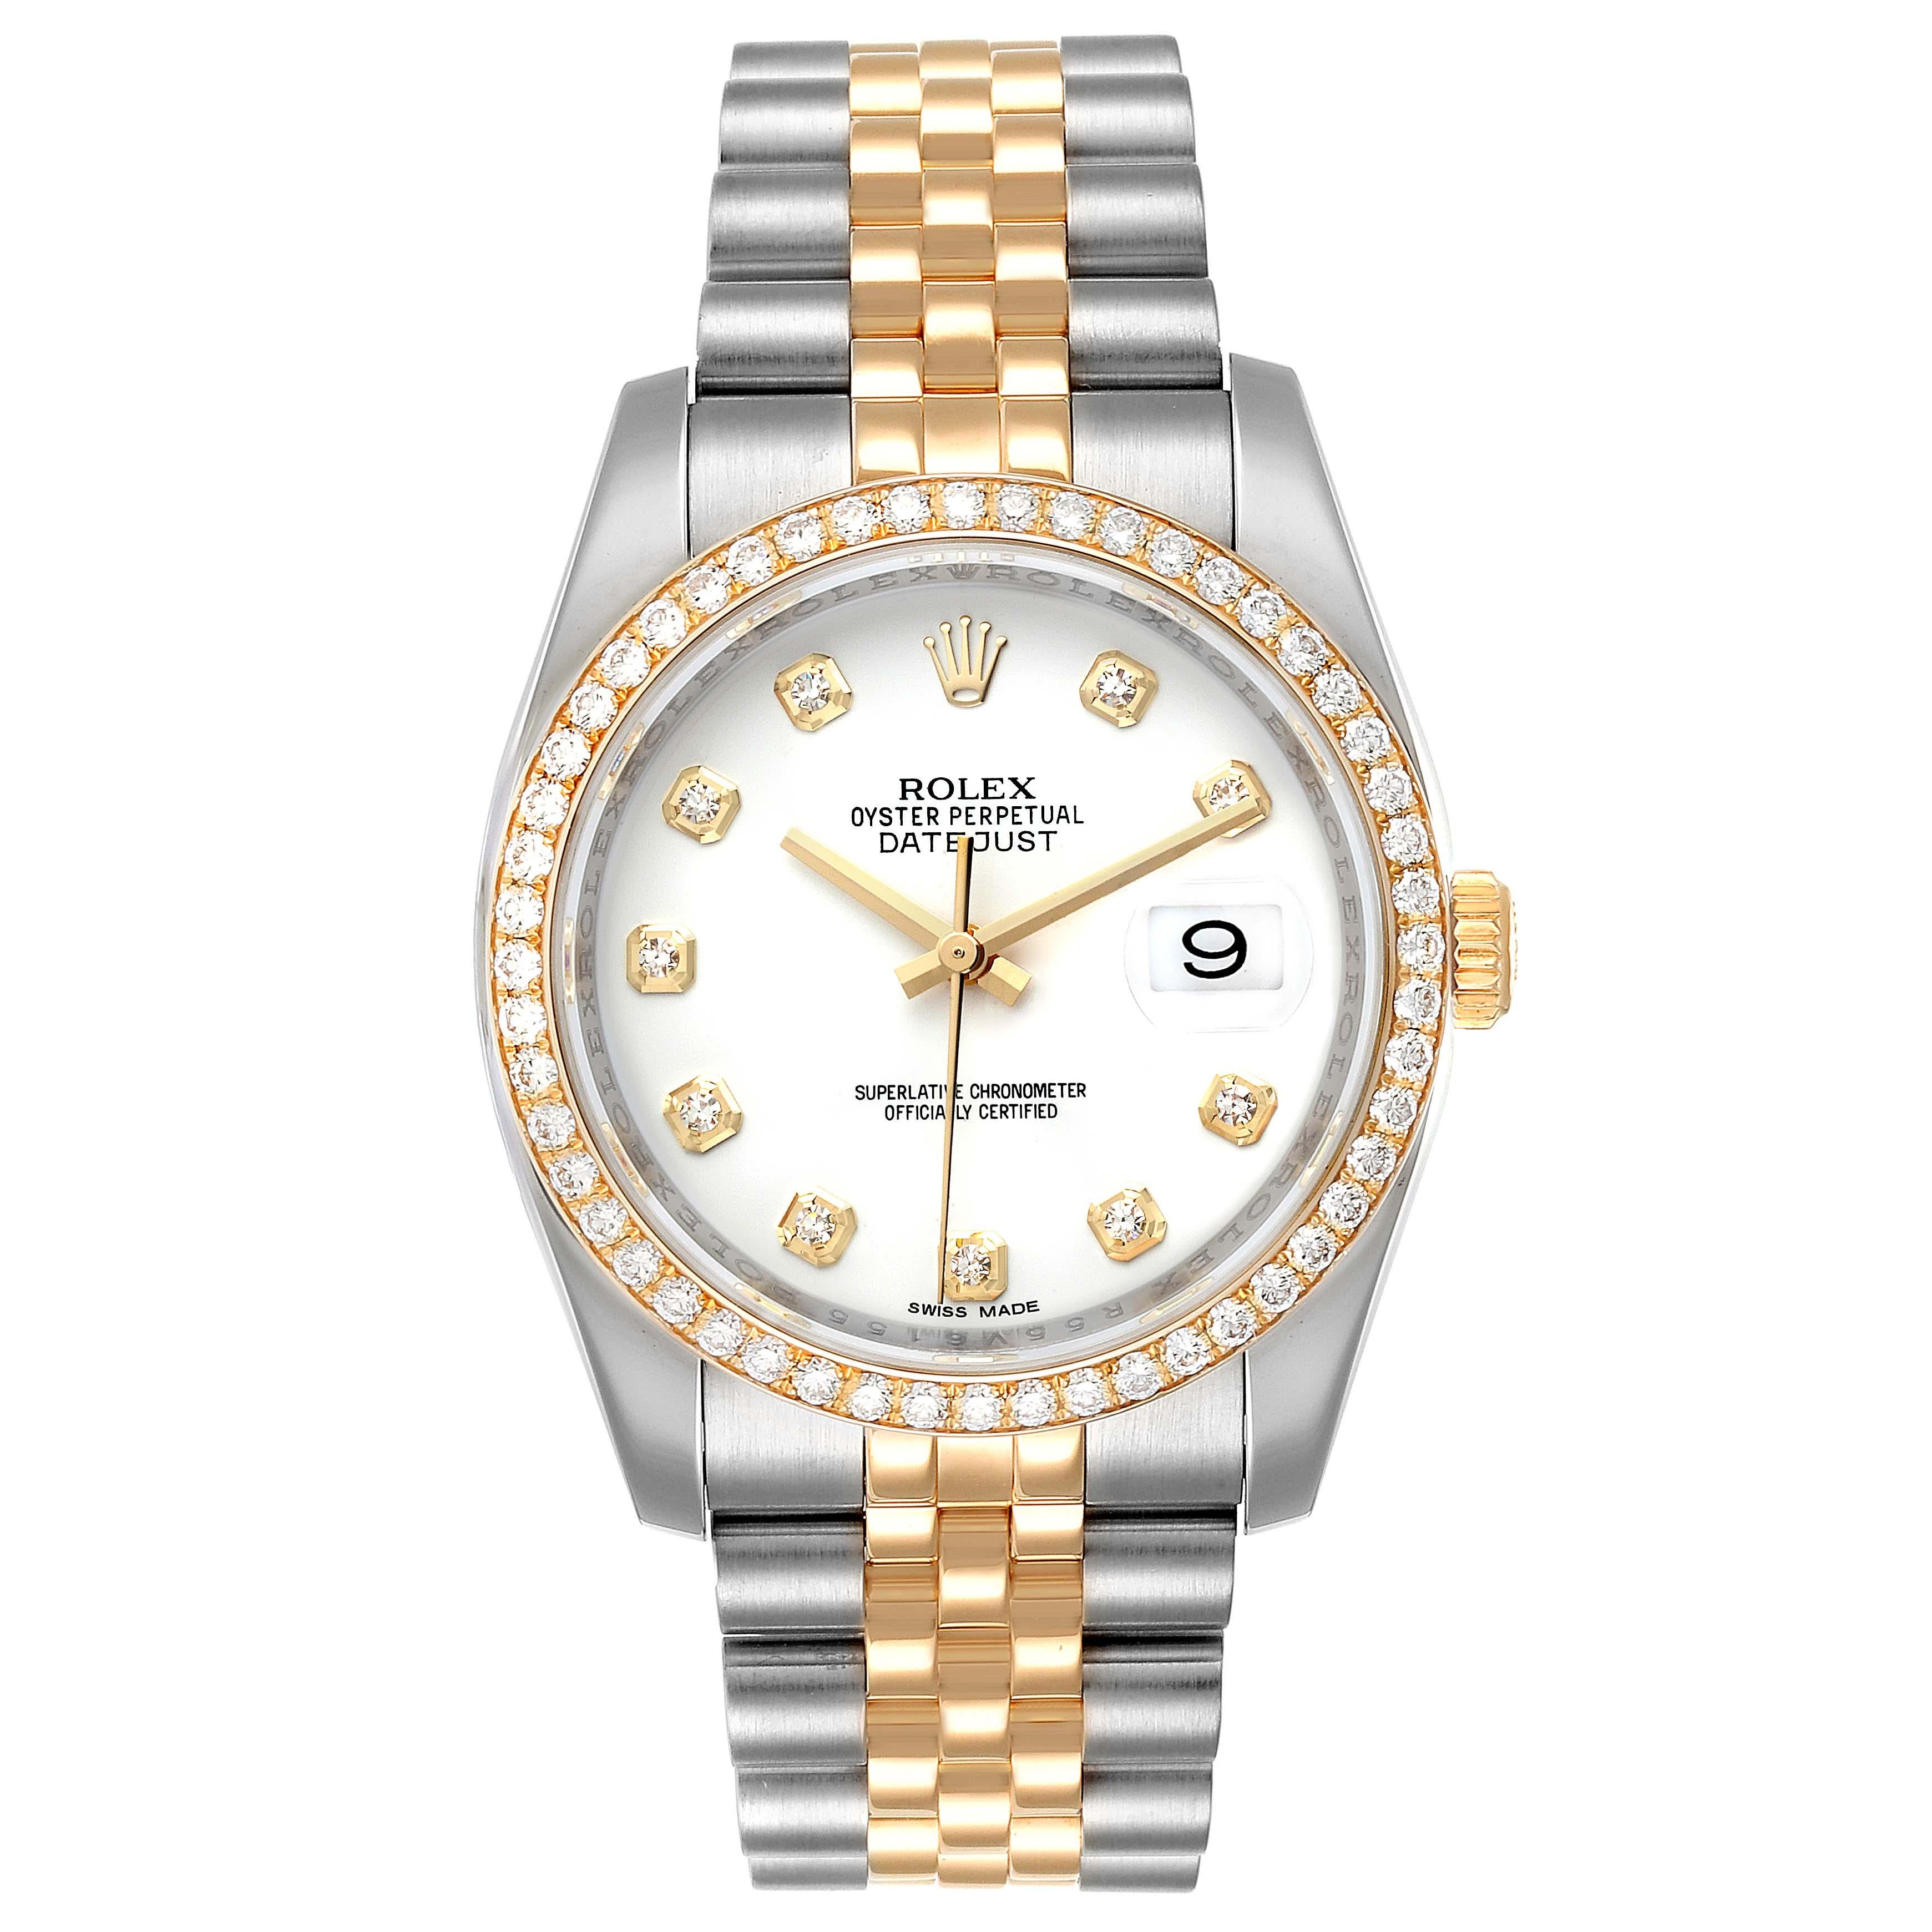 Rolex Datejust Steel Yellow Gold White Diamond Dial Mens Watch 116243. Officially certified chronometer self-winding movement. Stainless steel case 36.0 mm in diameter.  Rolex logo on a crown. Original Rolex factory 18k yellow gold diamond bezel.